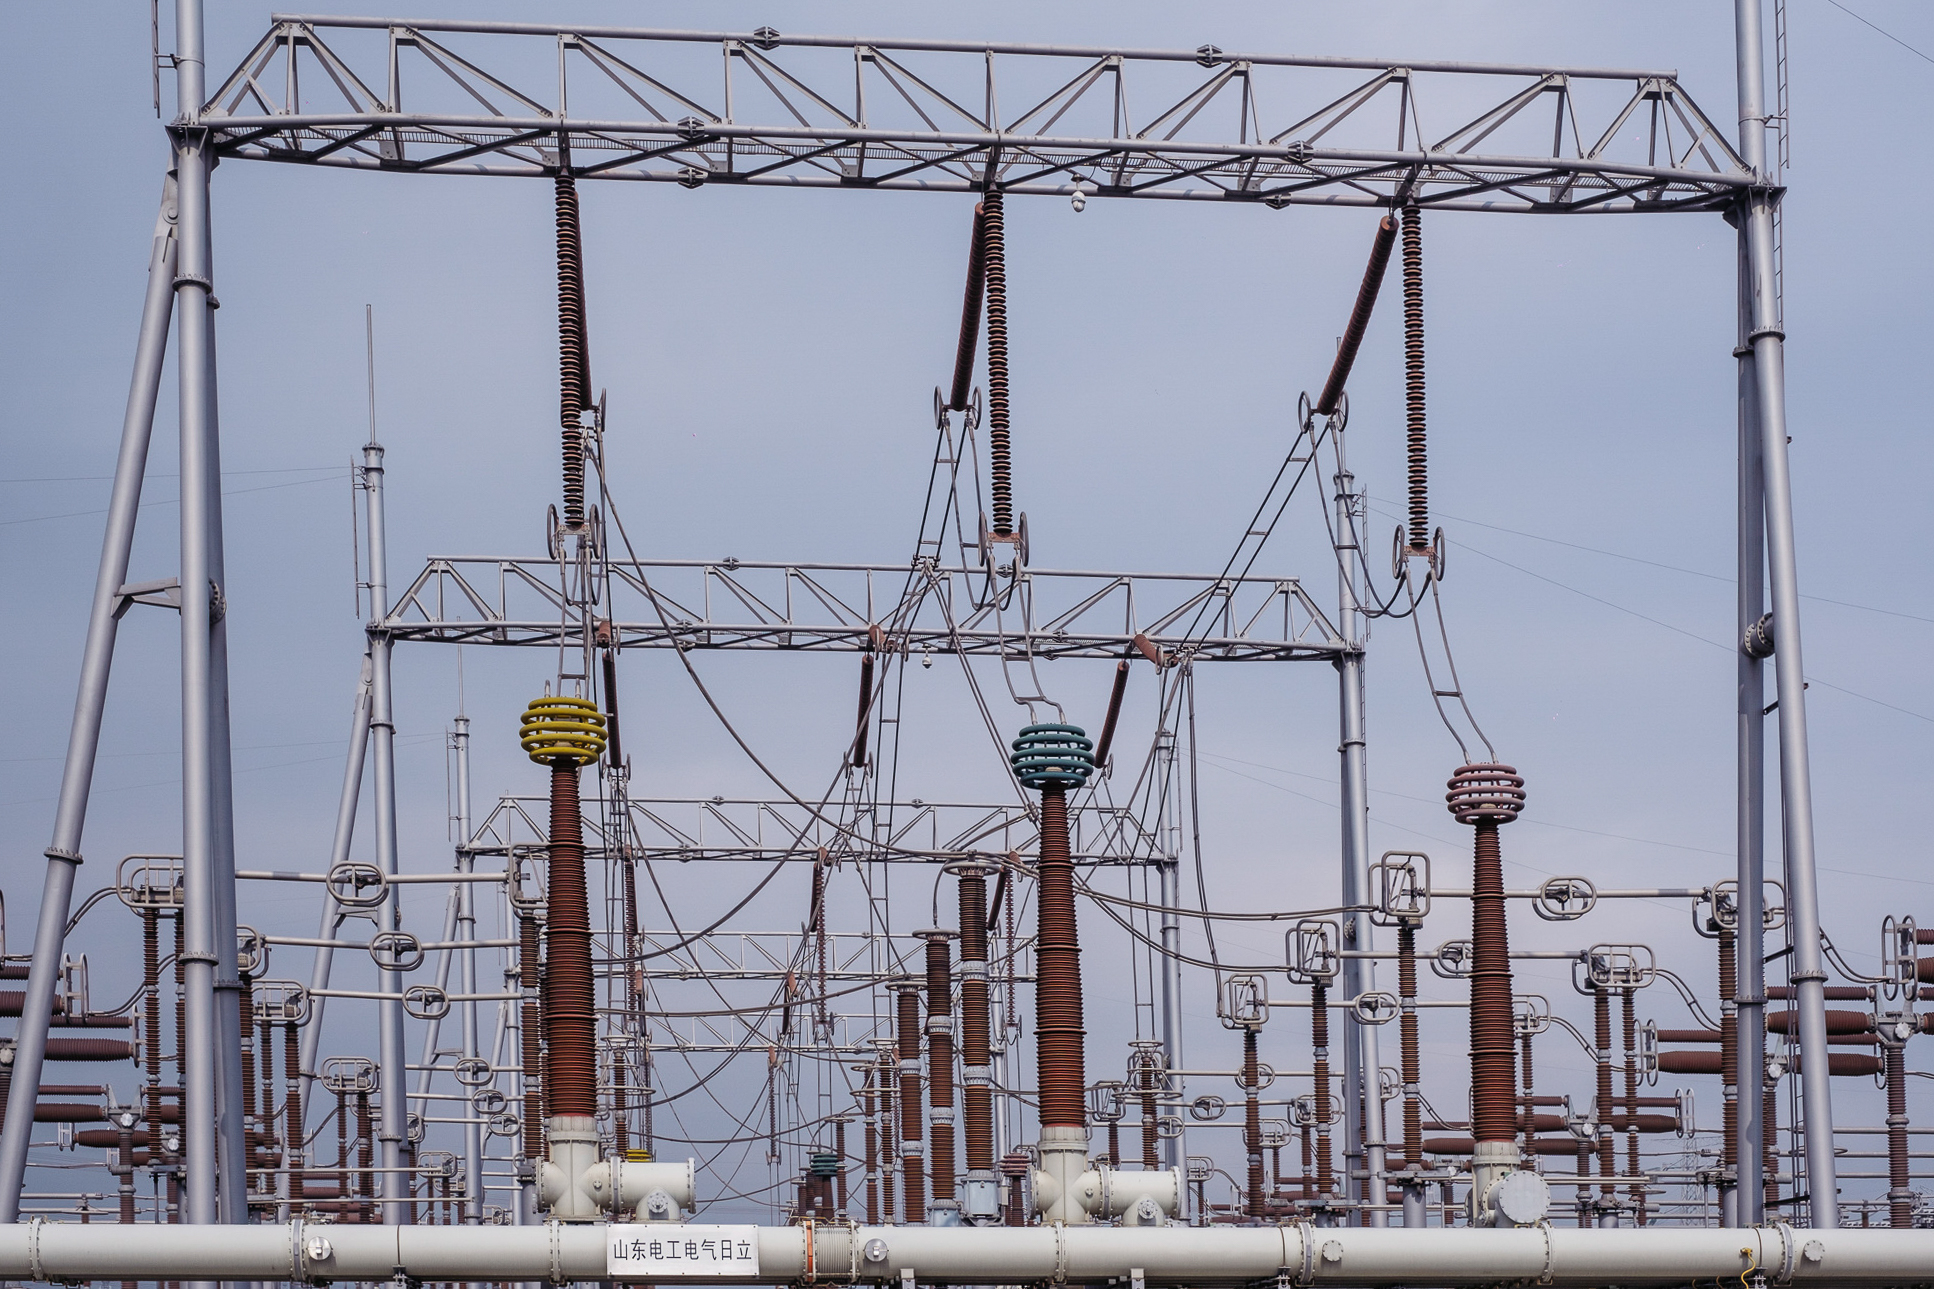 <p>Power lines at Shanghai Fengxian Converter Station in January 2021 (Image: Wu Huiyuan/Sixth Tone)</p>